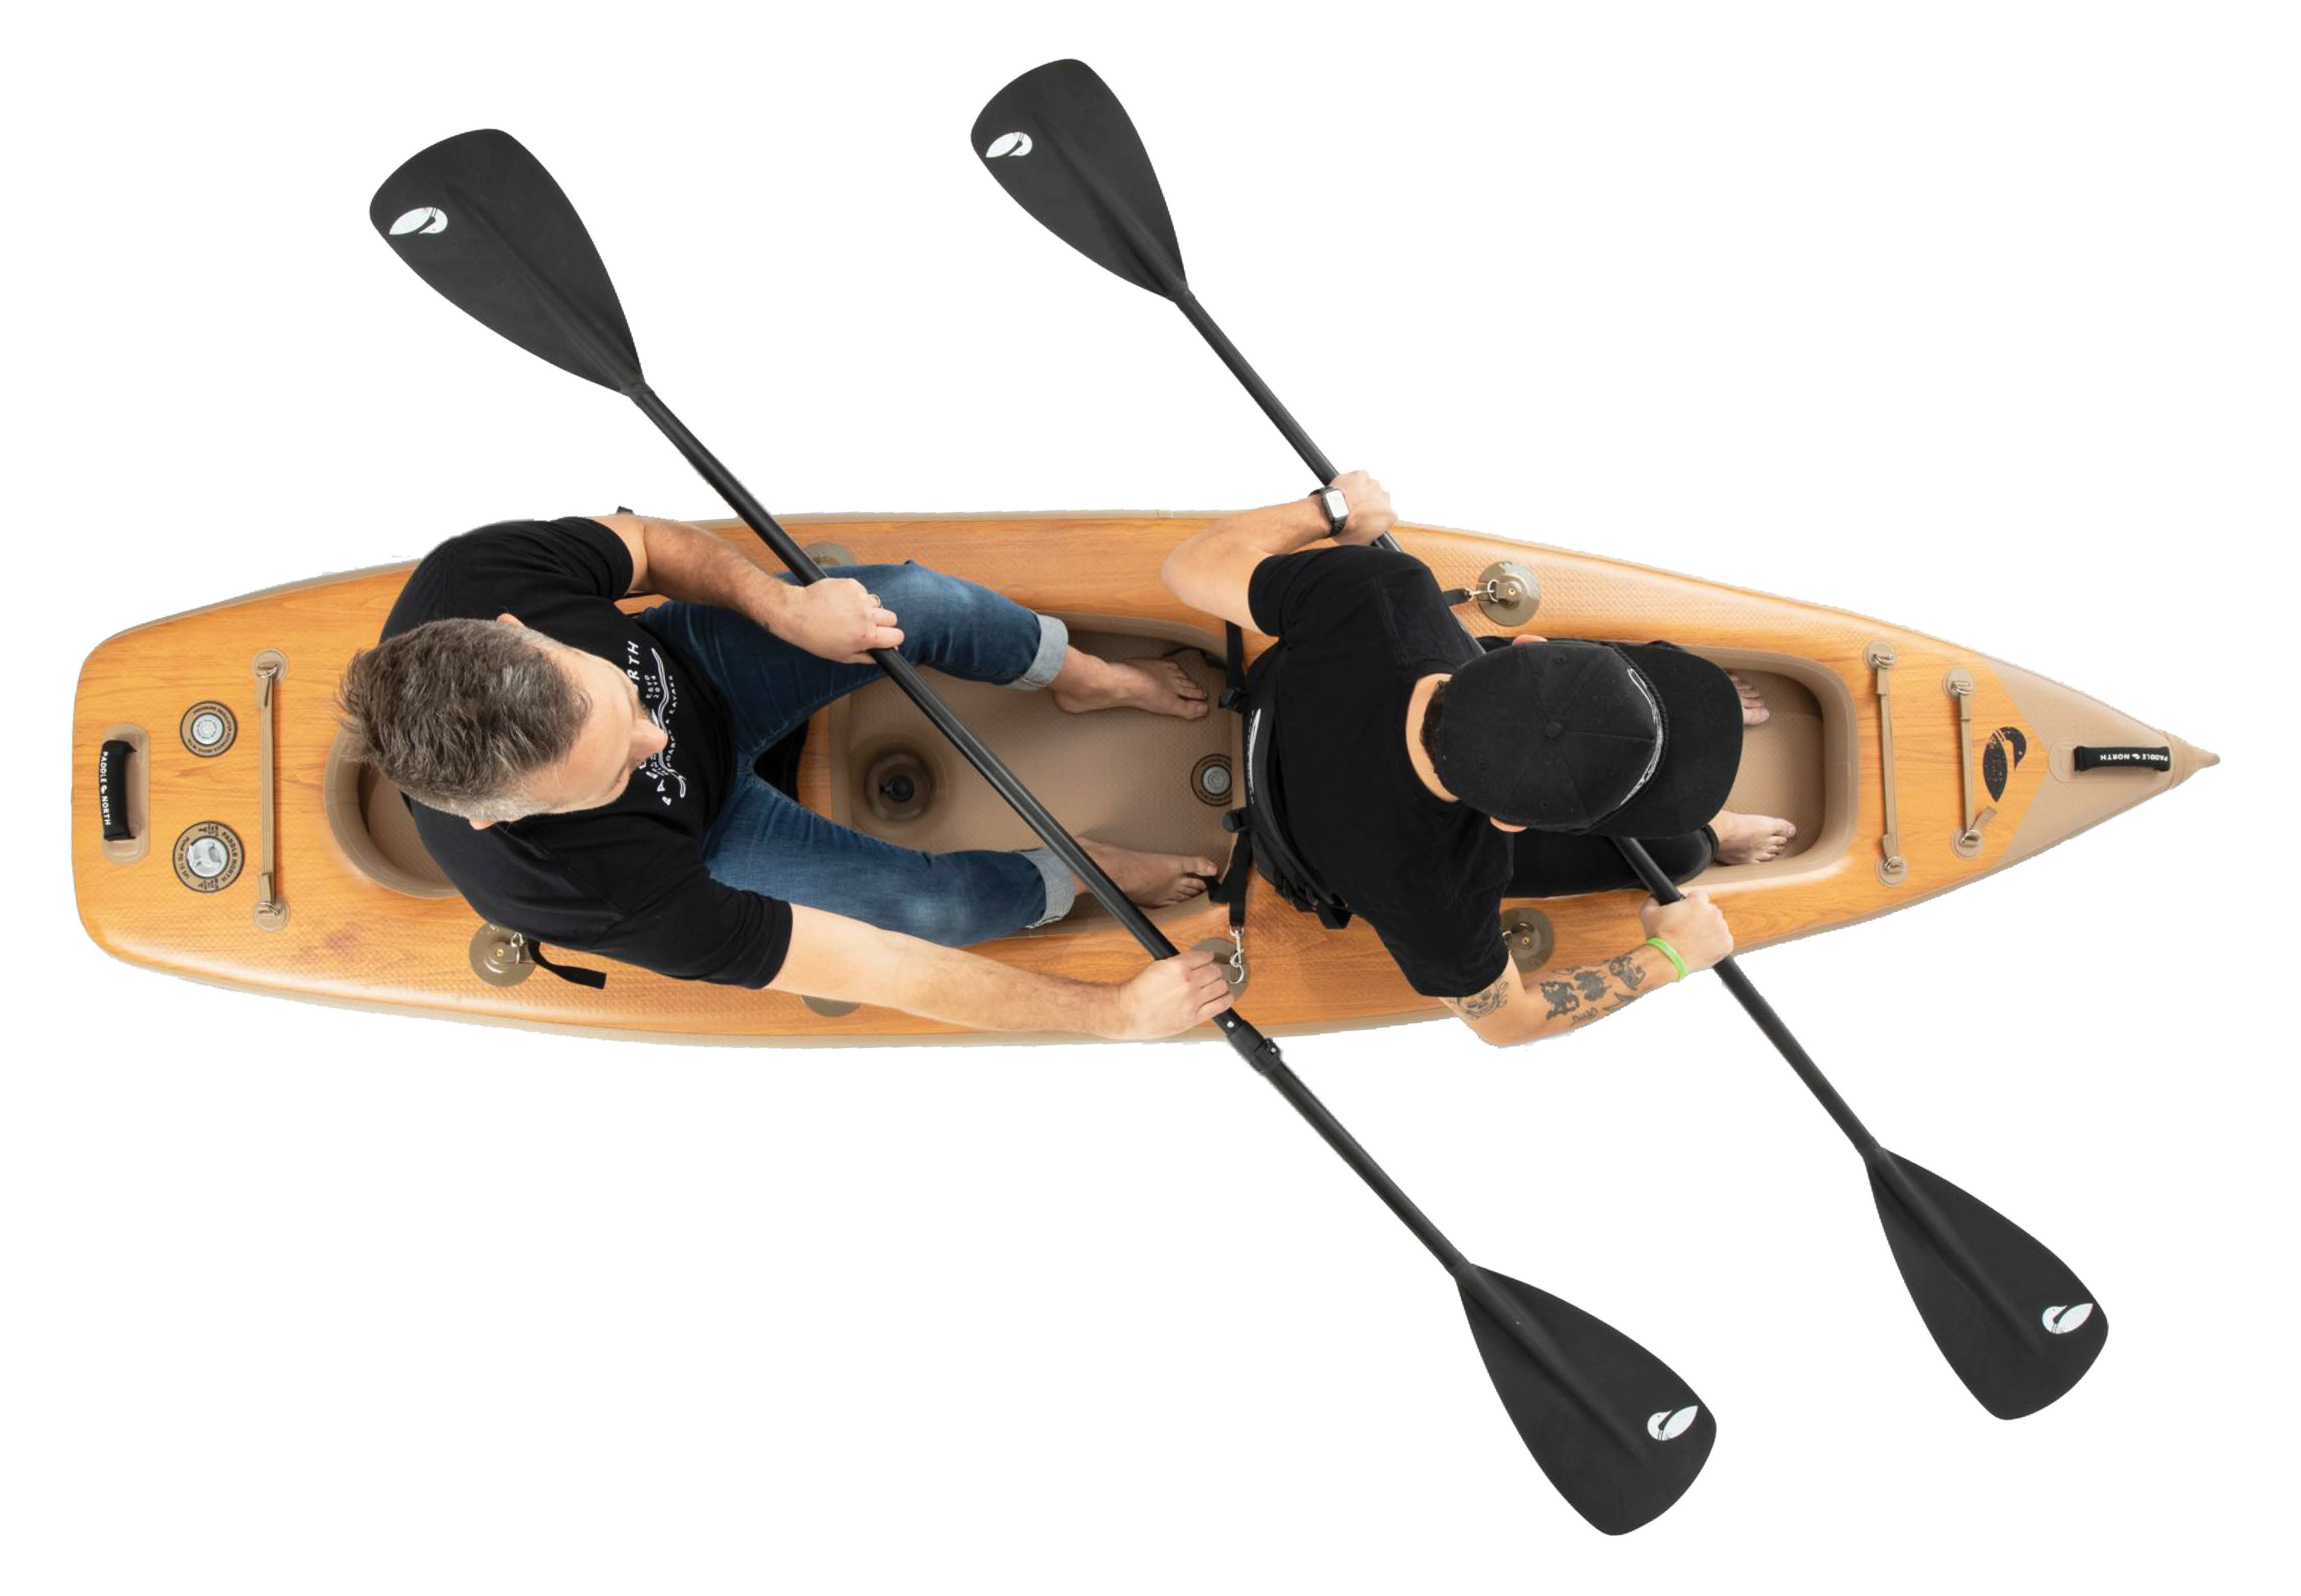 Karve XL inflatable tandem kayak with two paddlers, against white background